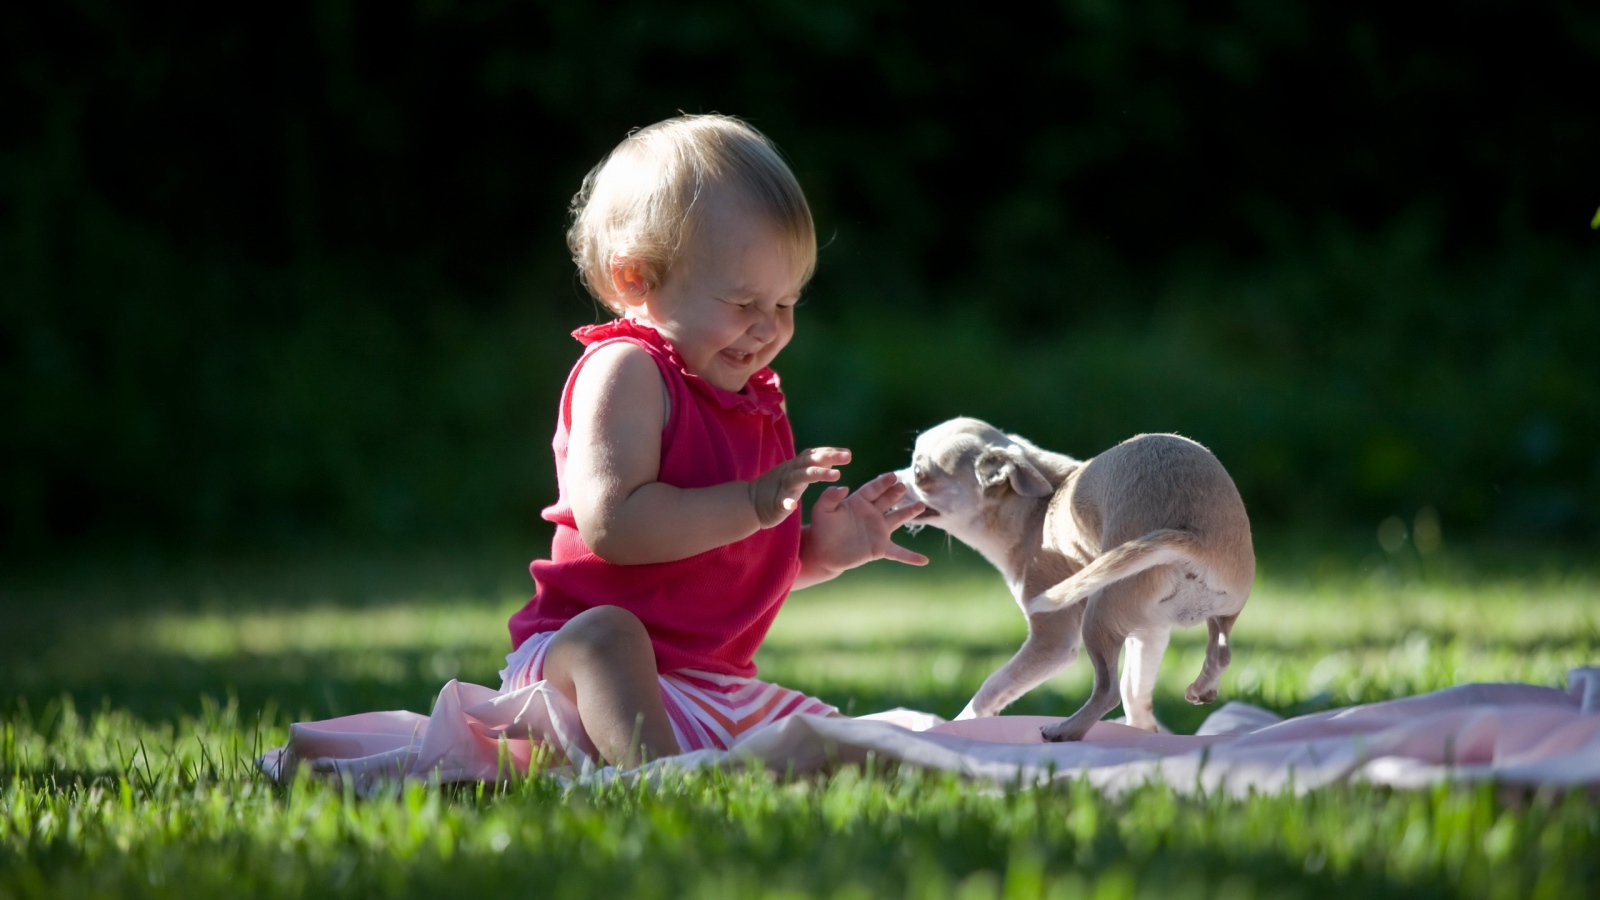 The child plays with dog